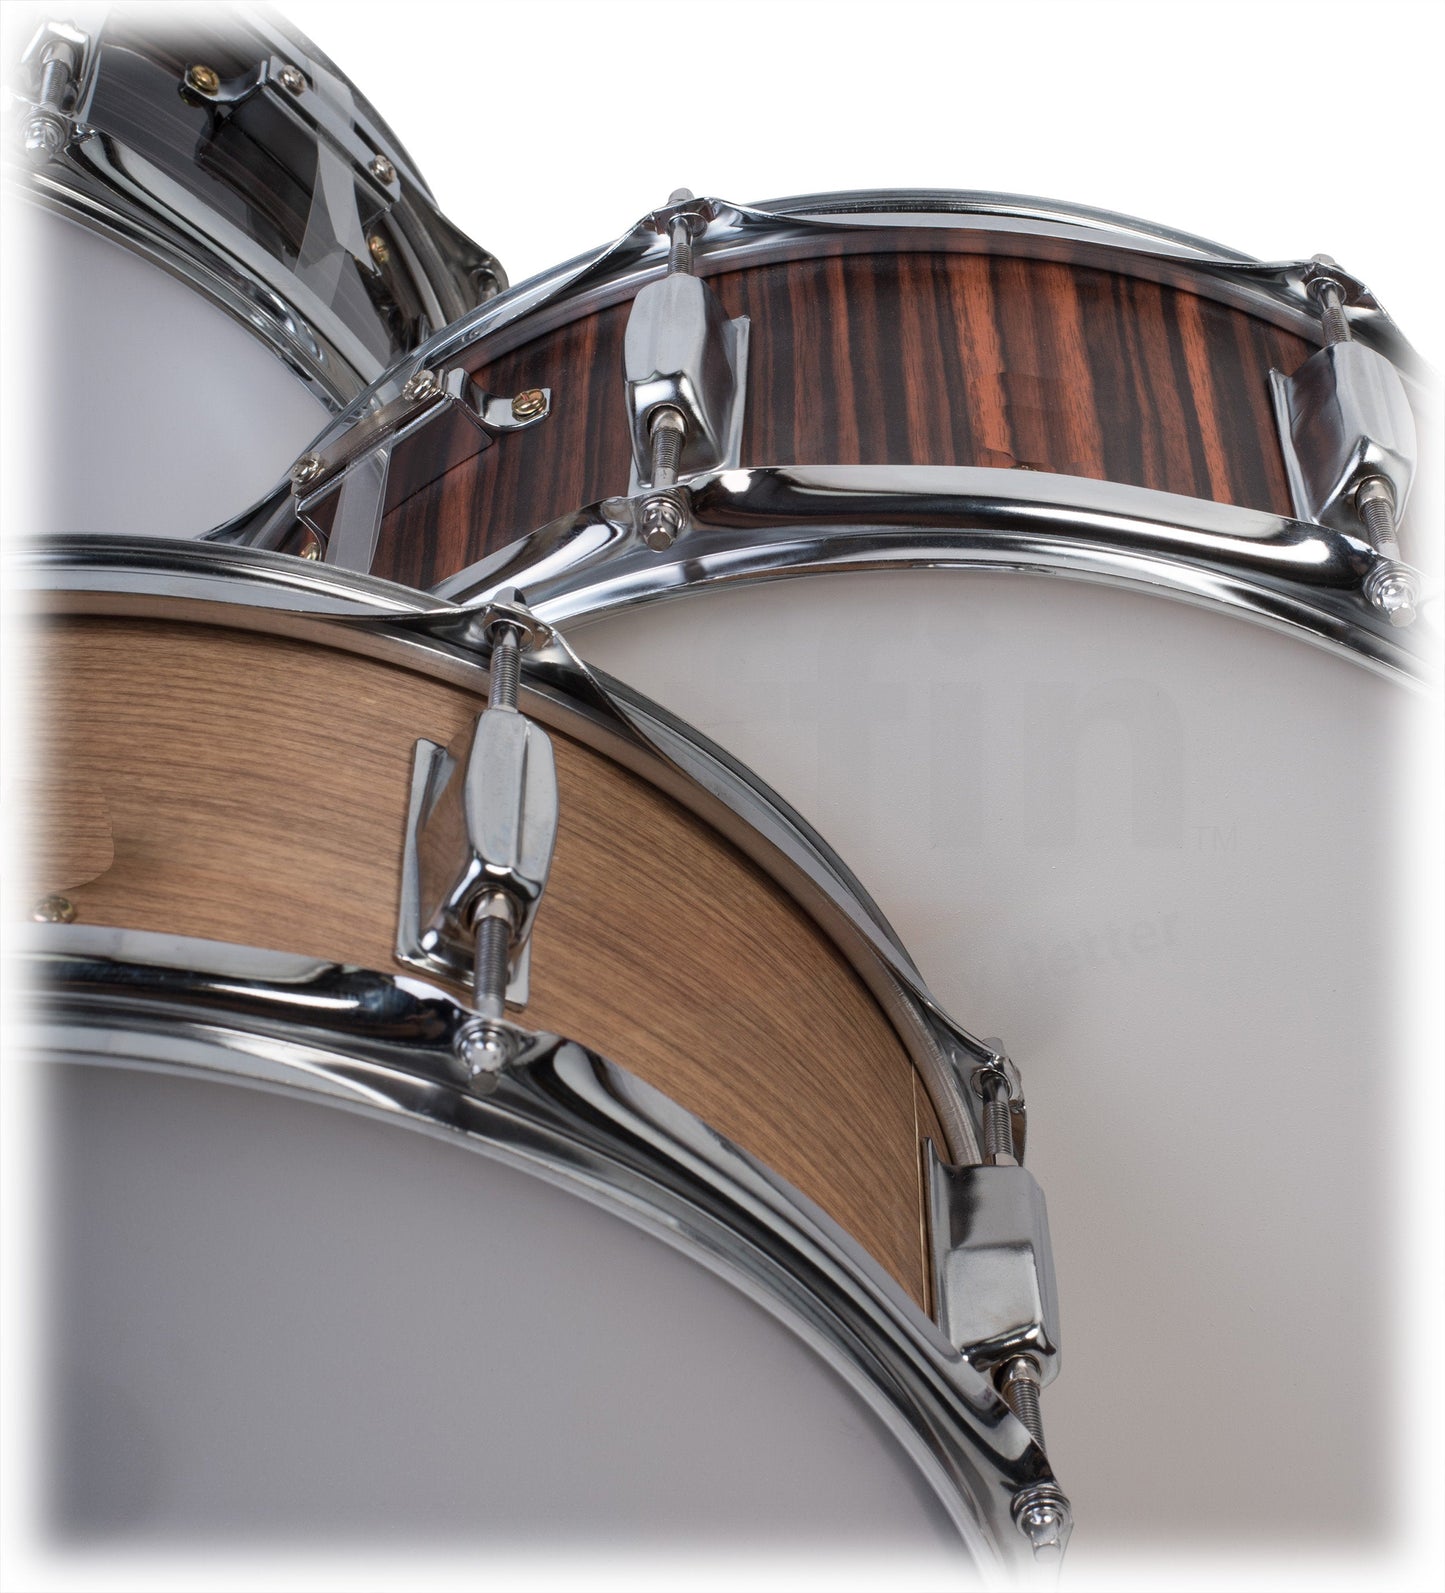 Snare Drum by GRIFFIN - 14" x 5.5"  Black Hickory PVC & Coated Head on Poplar Acoustic Wood Shell